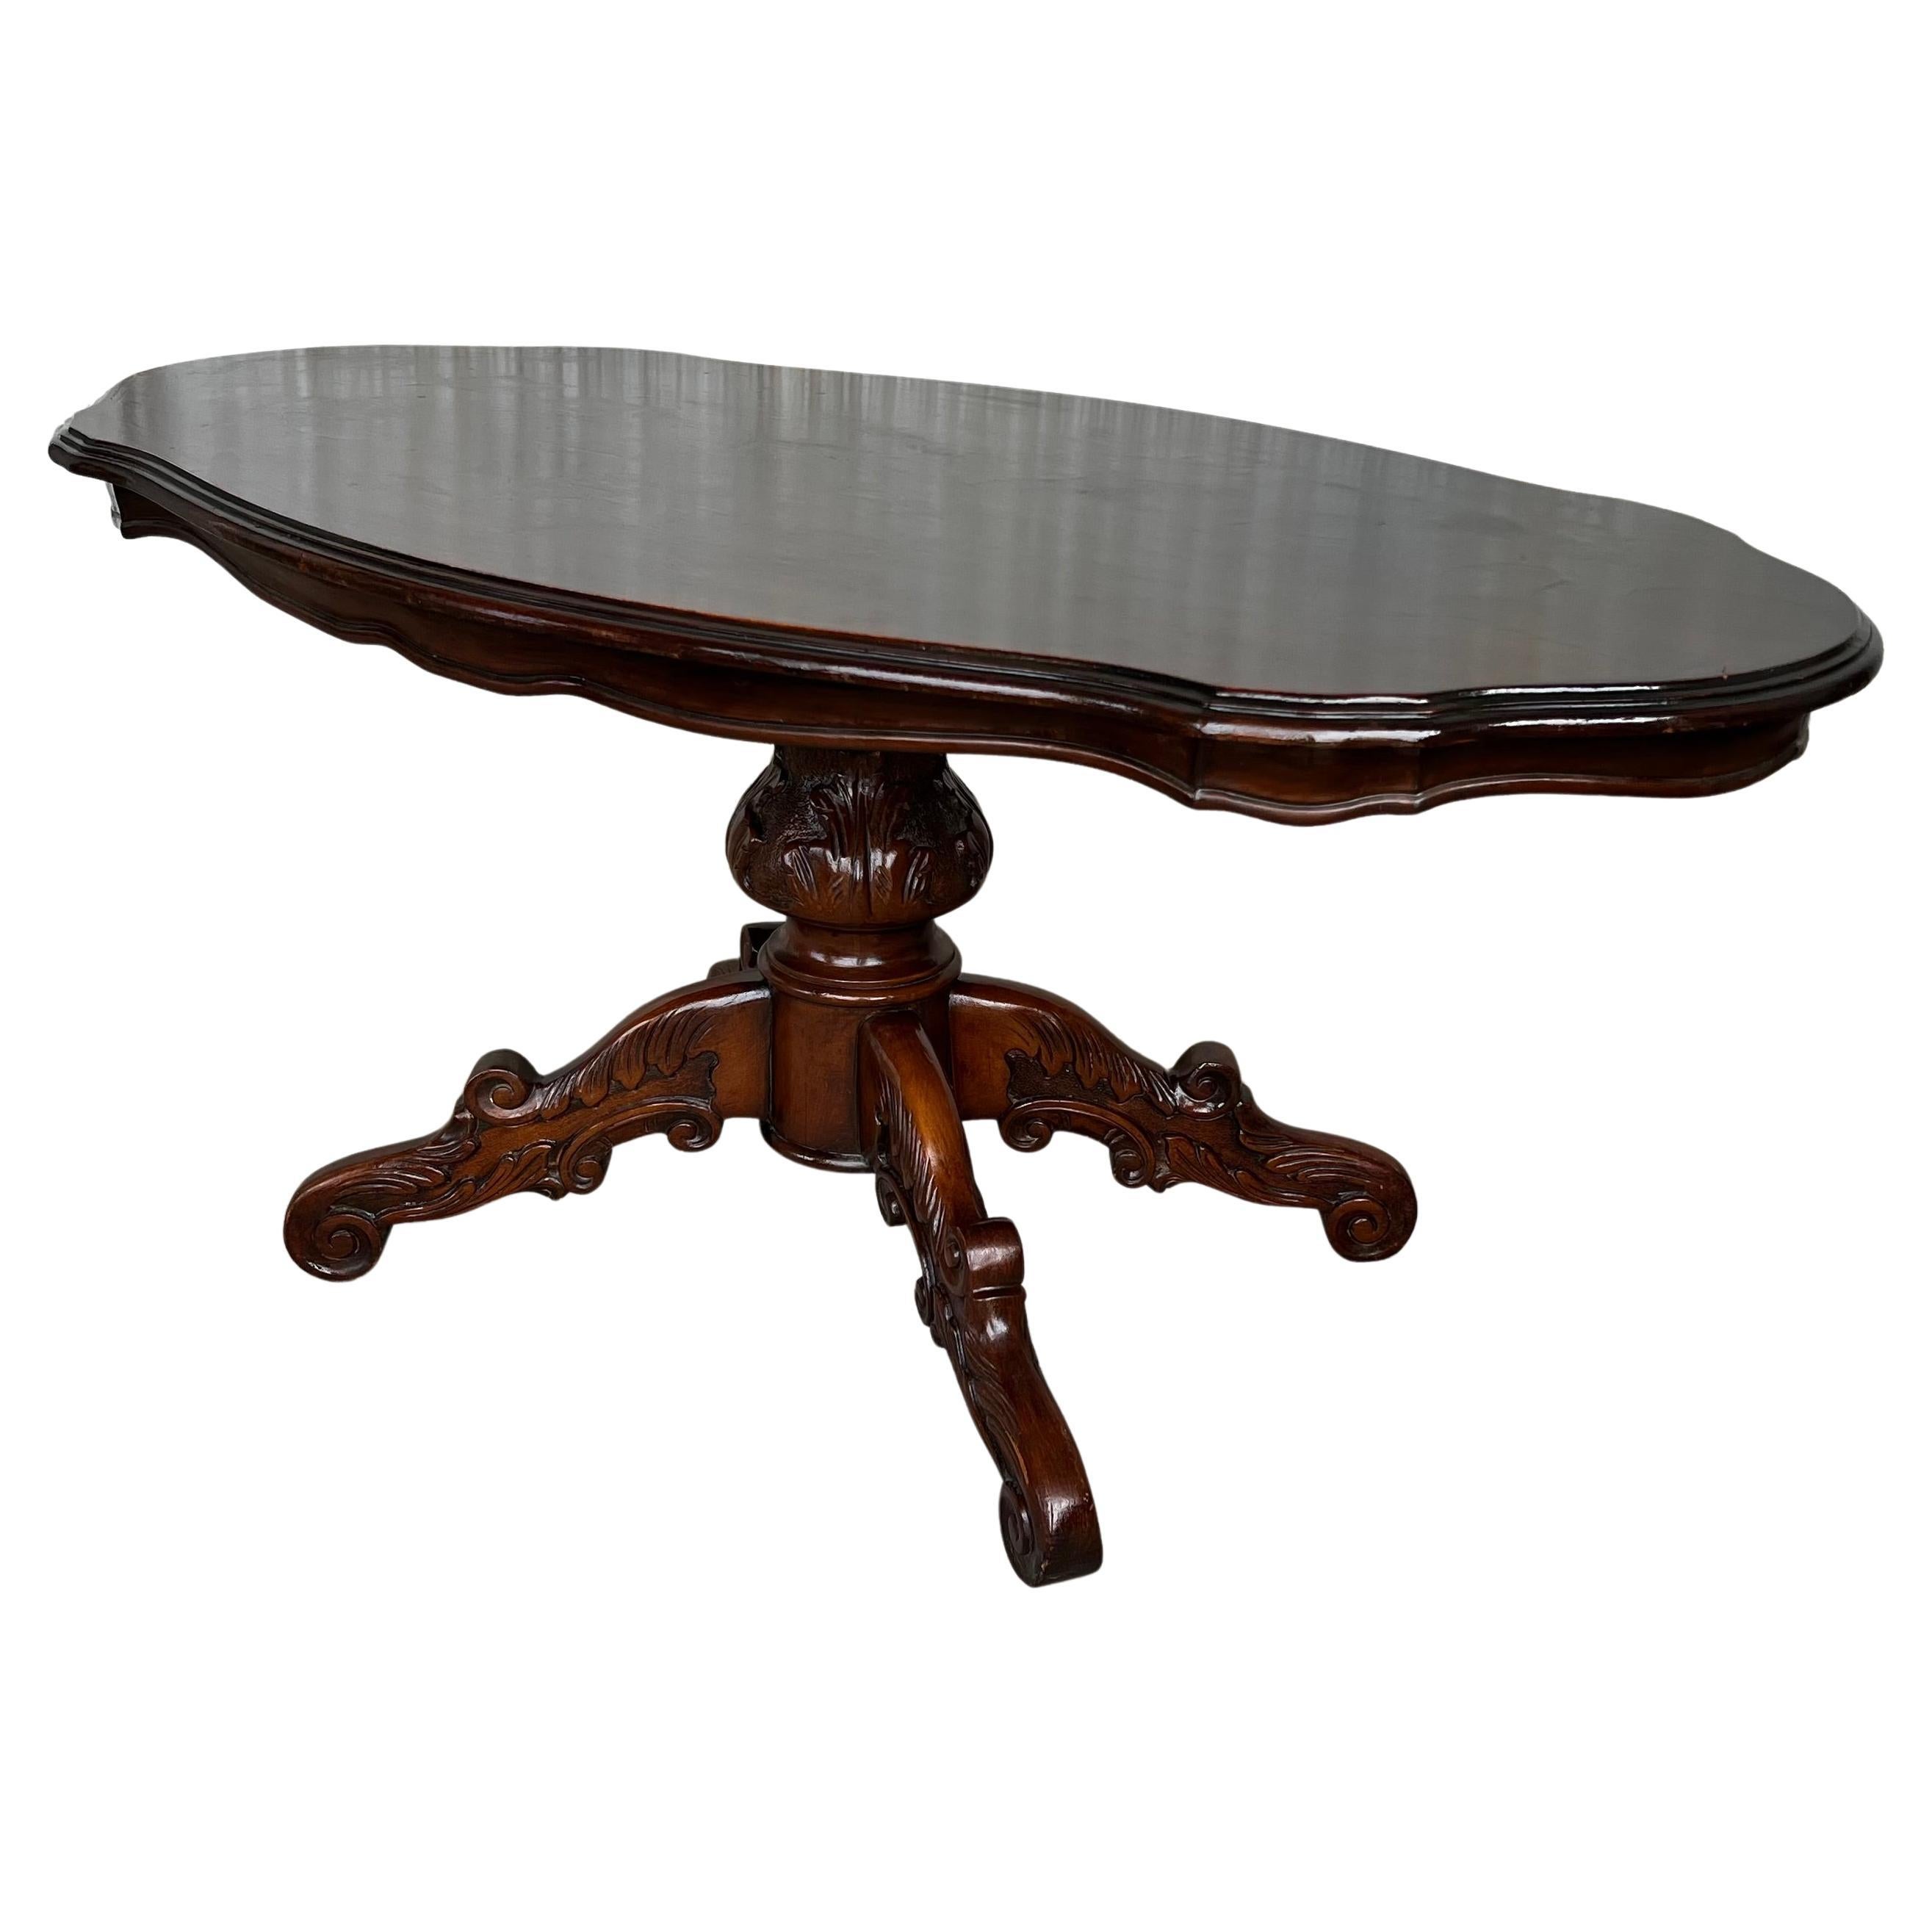 20th Century Spanish Mariano Garcia Carved Pedestal Coffee Table For Sale